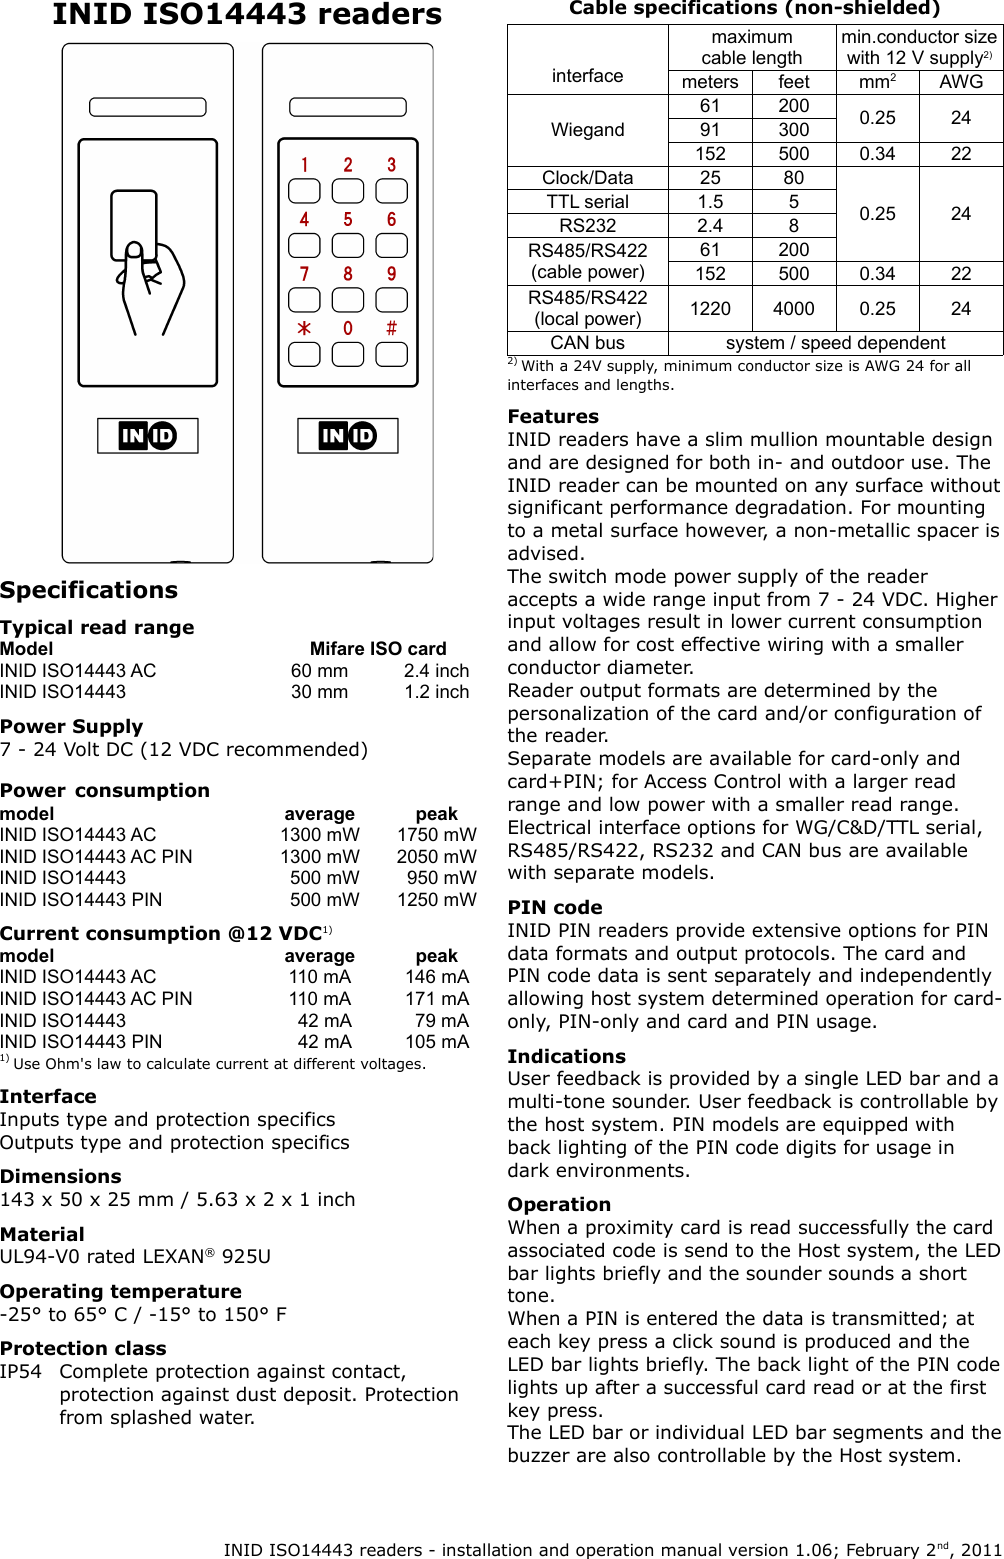 INID ISO14443 readersSpecificationsTypical read rangeModel Mifare ISO cardINID ISO14443 AC 60 mm 2.4 inchINID ISO14443 30 mm 1.2 inchPower Supply7 - 24 Volt DC (12 VDC recommended)Power consumptionmodel average peakINID ISO14443 AC 1300 mW 1750 mWINID ISO14443 AC PIN 1300 mW 2050 mWINID ISO14443   500 mW   950 mWINID ISO14443 PIN   500 mW 1250 mWCurrent consumption @12 VDC1)model average peakINID ISO14443 AC 110 mA 146 mAINID ISO14443 AC PIN 110 mA 171 mAINID ISO14443   42 mA   79 mAINID ISO14443 PIN   42 mA 105 mA1) Use Ohm&apos;s law to calculate current at different voltages.InterfaceInputs type and protection specificsOutputs type and protection specificsDimensions143 x 50 x 25 mm / 5.63 x 2 x 1 inchMaterialUL94-V0 rated LEXAN® 925UOperating temperature-25° to 65° C / -15° to 150° FProtection classIP54 Complete protection against contact, protection against dust deposit. Protection from splashed water.Cable specifications (non-shielded)interfacemaximum cable lengthmin.conductor size with 12 V supply2)meters feet mm2AWGWiegand61 200 0.25 2491 300152 500 0.34 22Clock/Data 25 800.25 24TTL serial 1.5 5RS232 2.4 8RS485/RS422 (cable power)61 200152 500 0.34 22RS485/RS422 (local power) 1220 4000 0.25 24CAN bus system / speed dependent2) With a 24V supply, minimum conductor size is AWG 24 for all interfaces and lengths.FeaturesINID readers have a slim mullion mountable design and are designed for both in- and outdoor use. The INID reader can be mounted on any surface without significant performance degradation. For mounting to a metal surface however, a non-metallic spacer is advised.The switch mode power supply of the reader accepts a wide range input from 7 - 24 VDC. Higher input voltages result in lower current consumption and allow for cost effective wiring with a smaller conductor diameter.Reader output formats are determined by the personalization of the card and/or configuration of the reader.Separate models are available for card-only and card+PIN; for Access Control with a larger read range and low power with a smaller read range.Electrical interface options for WG/C&amp;D/TTL serial, RS485/RS422, RS232 and CAN bus are available with separate models.PIN codeINID PIN readers provide extensive options for PIN data formats and output protocols. The card and PIN code data is sent separately and independently allowing host system determined operation for card-only, PIN-only and card and PIN usage.IndicationsUser feedback is provided by a single LED bar and a multi-tone sounder. User feedback is controllable by the host system. PIN models are equipped with back lighting of the PIN code digits for usage in dark environments.OperationWhen a proximity card is read successfully the card associated code is send to the Host system, the LED bar lights briefly and the sounder sounds a short tone.When a PIN is entered the data is transmitted; at each key press a click sound is produced and the LED bar lights briefly. The back light of the PIN code lights up after a successful card read or at the first key press.The LED bar or individual LED bar segments and the buzzer are also controllable by the Host system. INID ISO14443 readers - installation and operation manual version 1.06; February 2nd, 2011